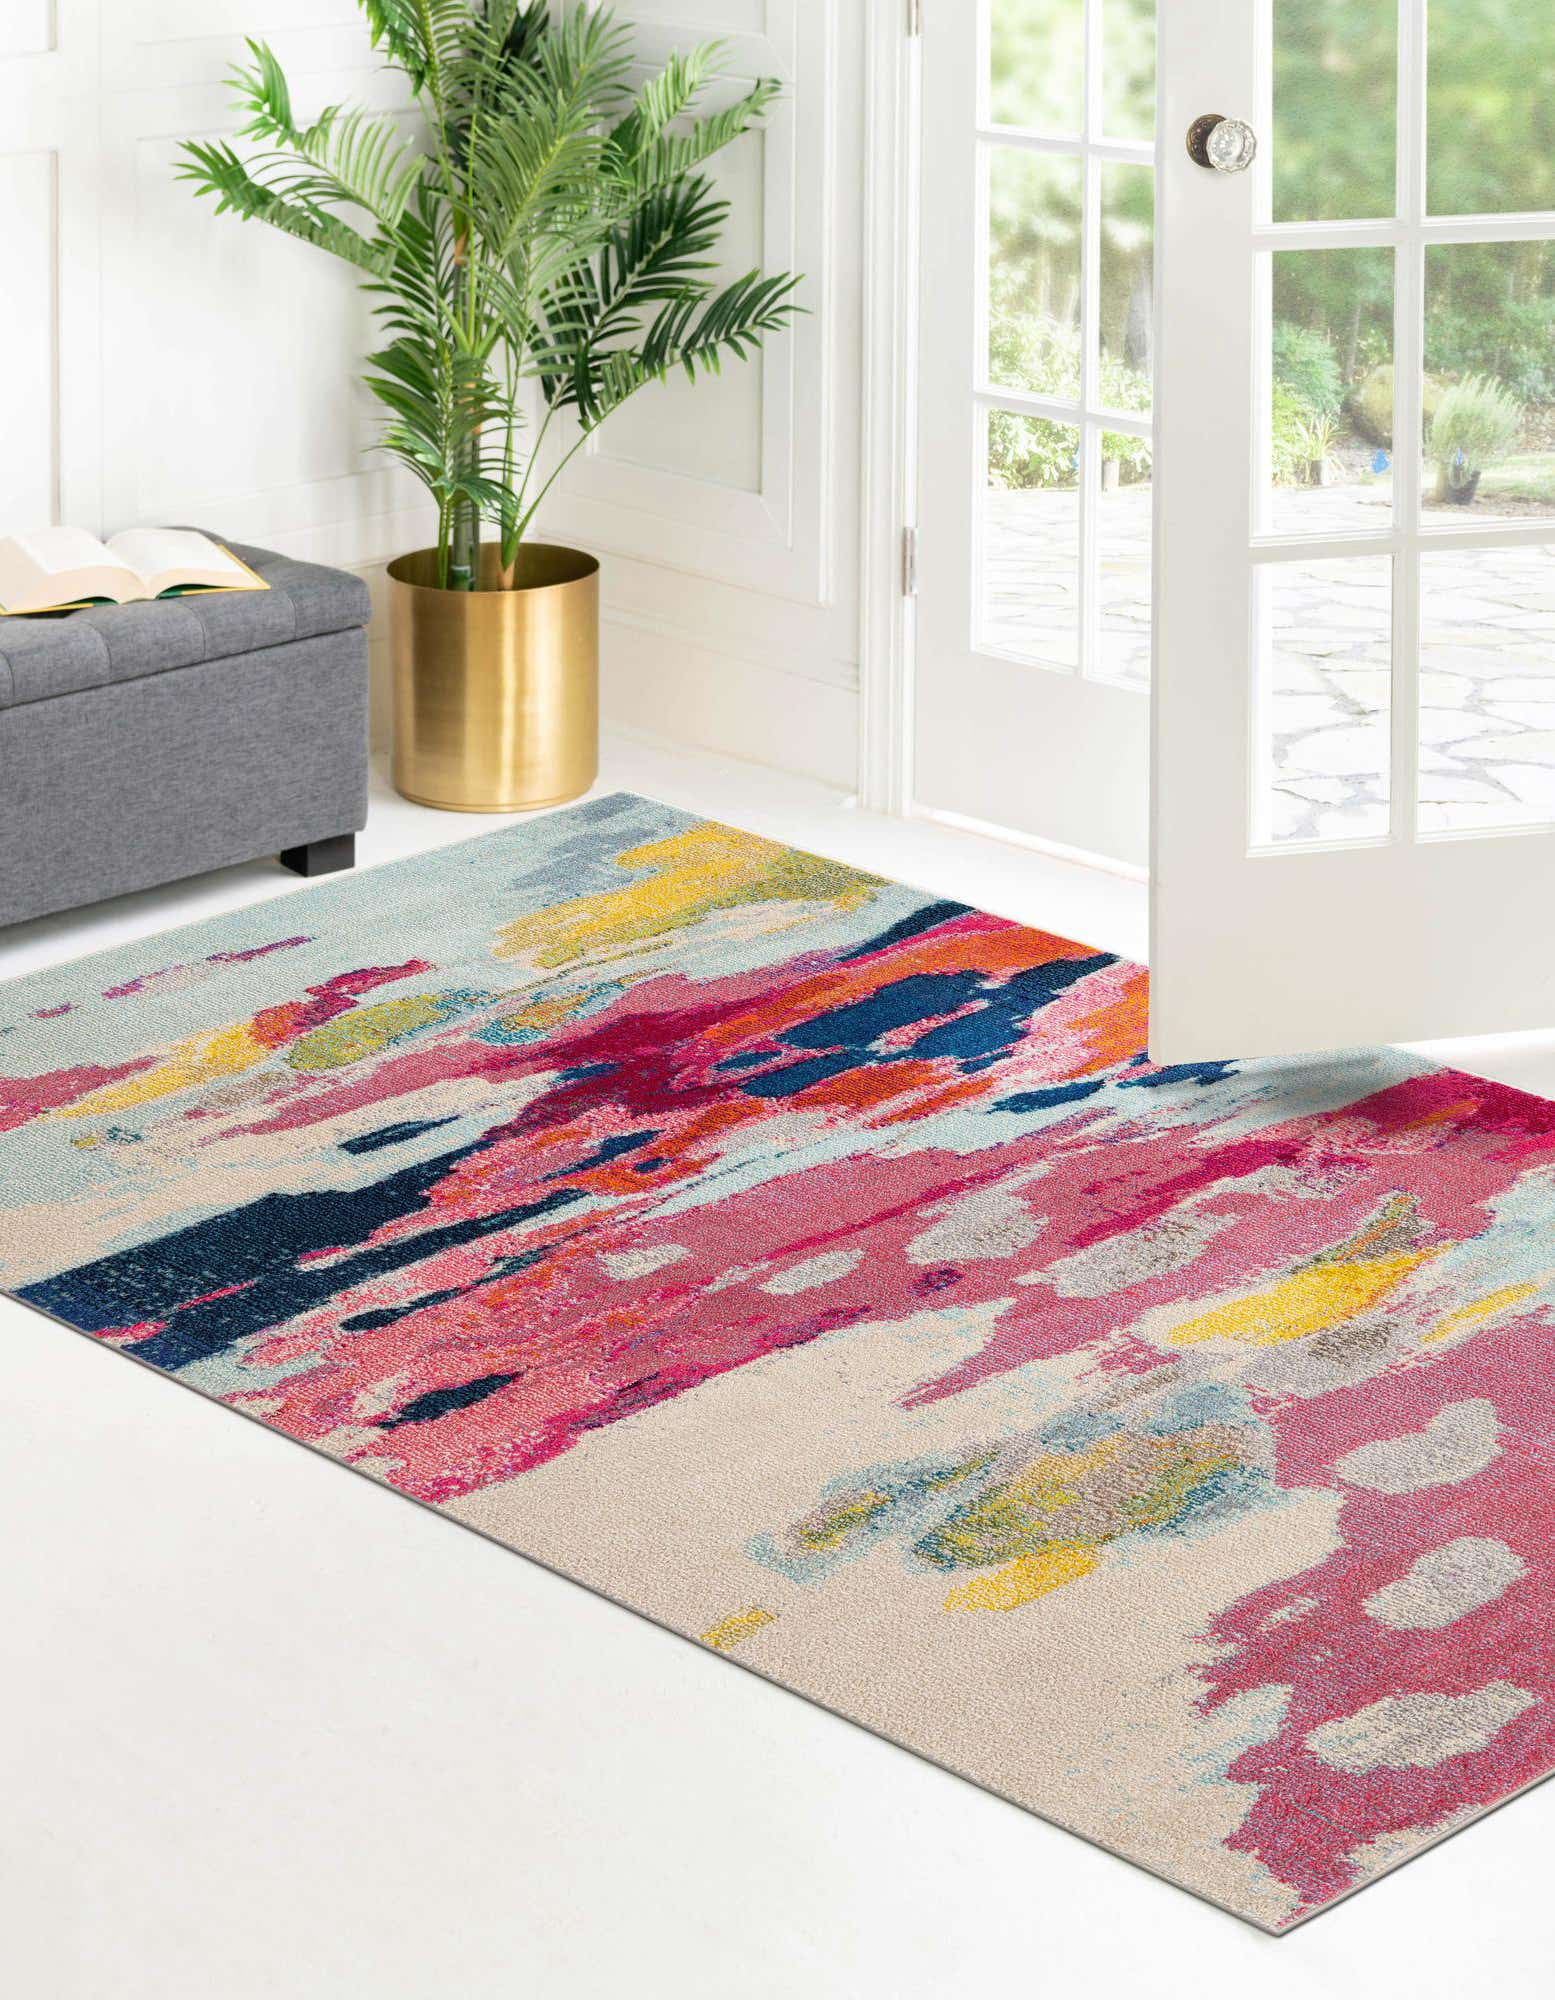 Buy Austin Abstract 10x13 Light Blue & Pink Rug